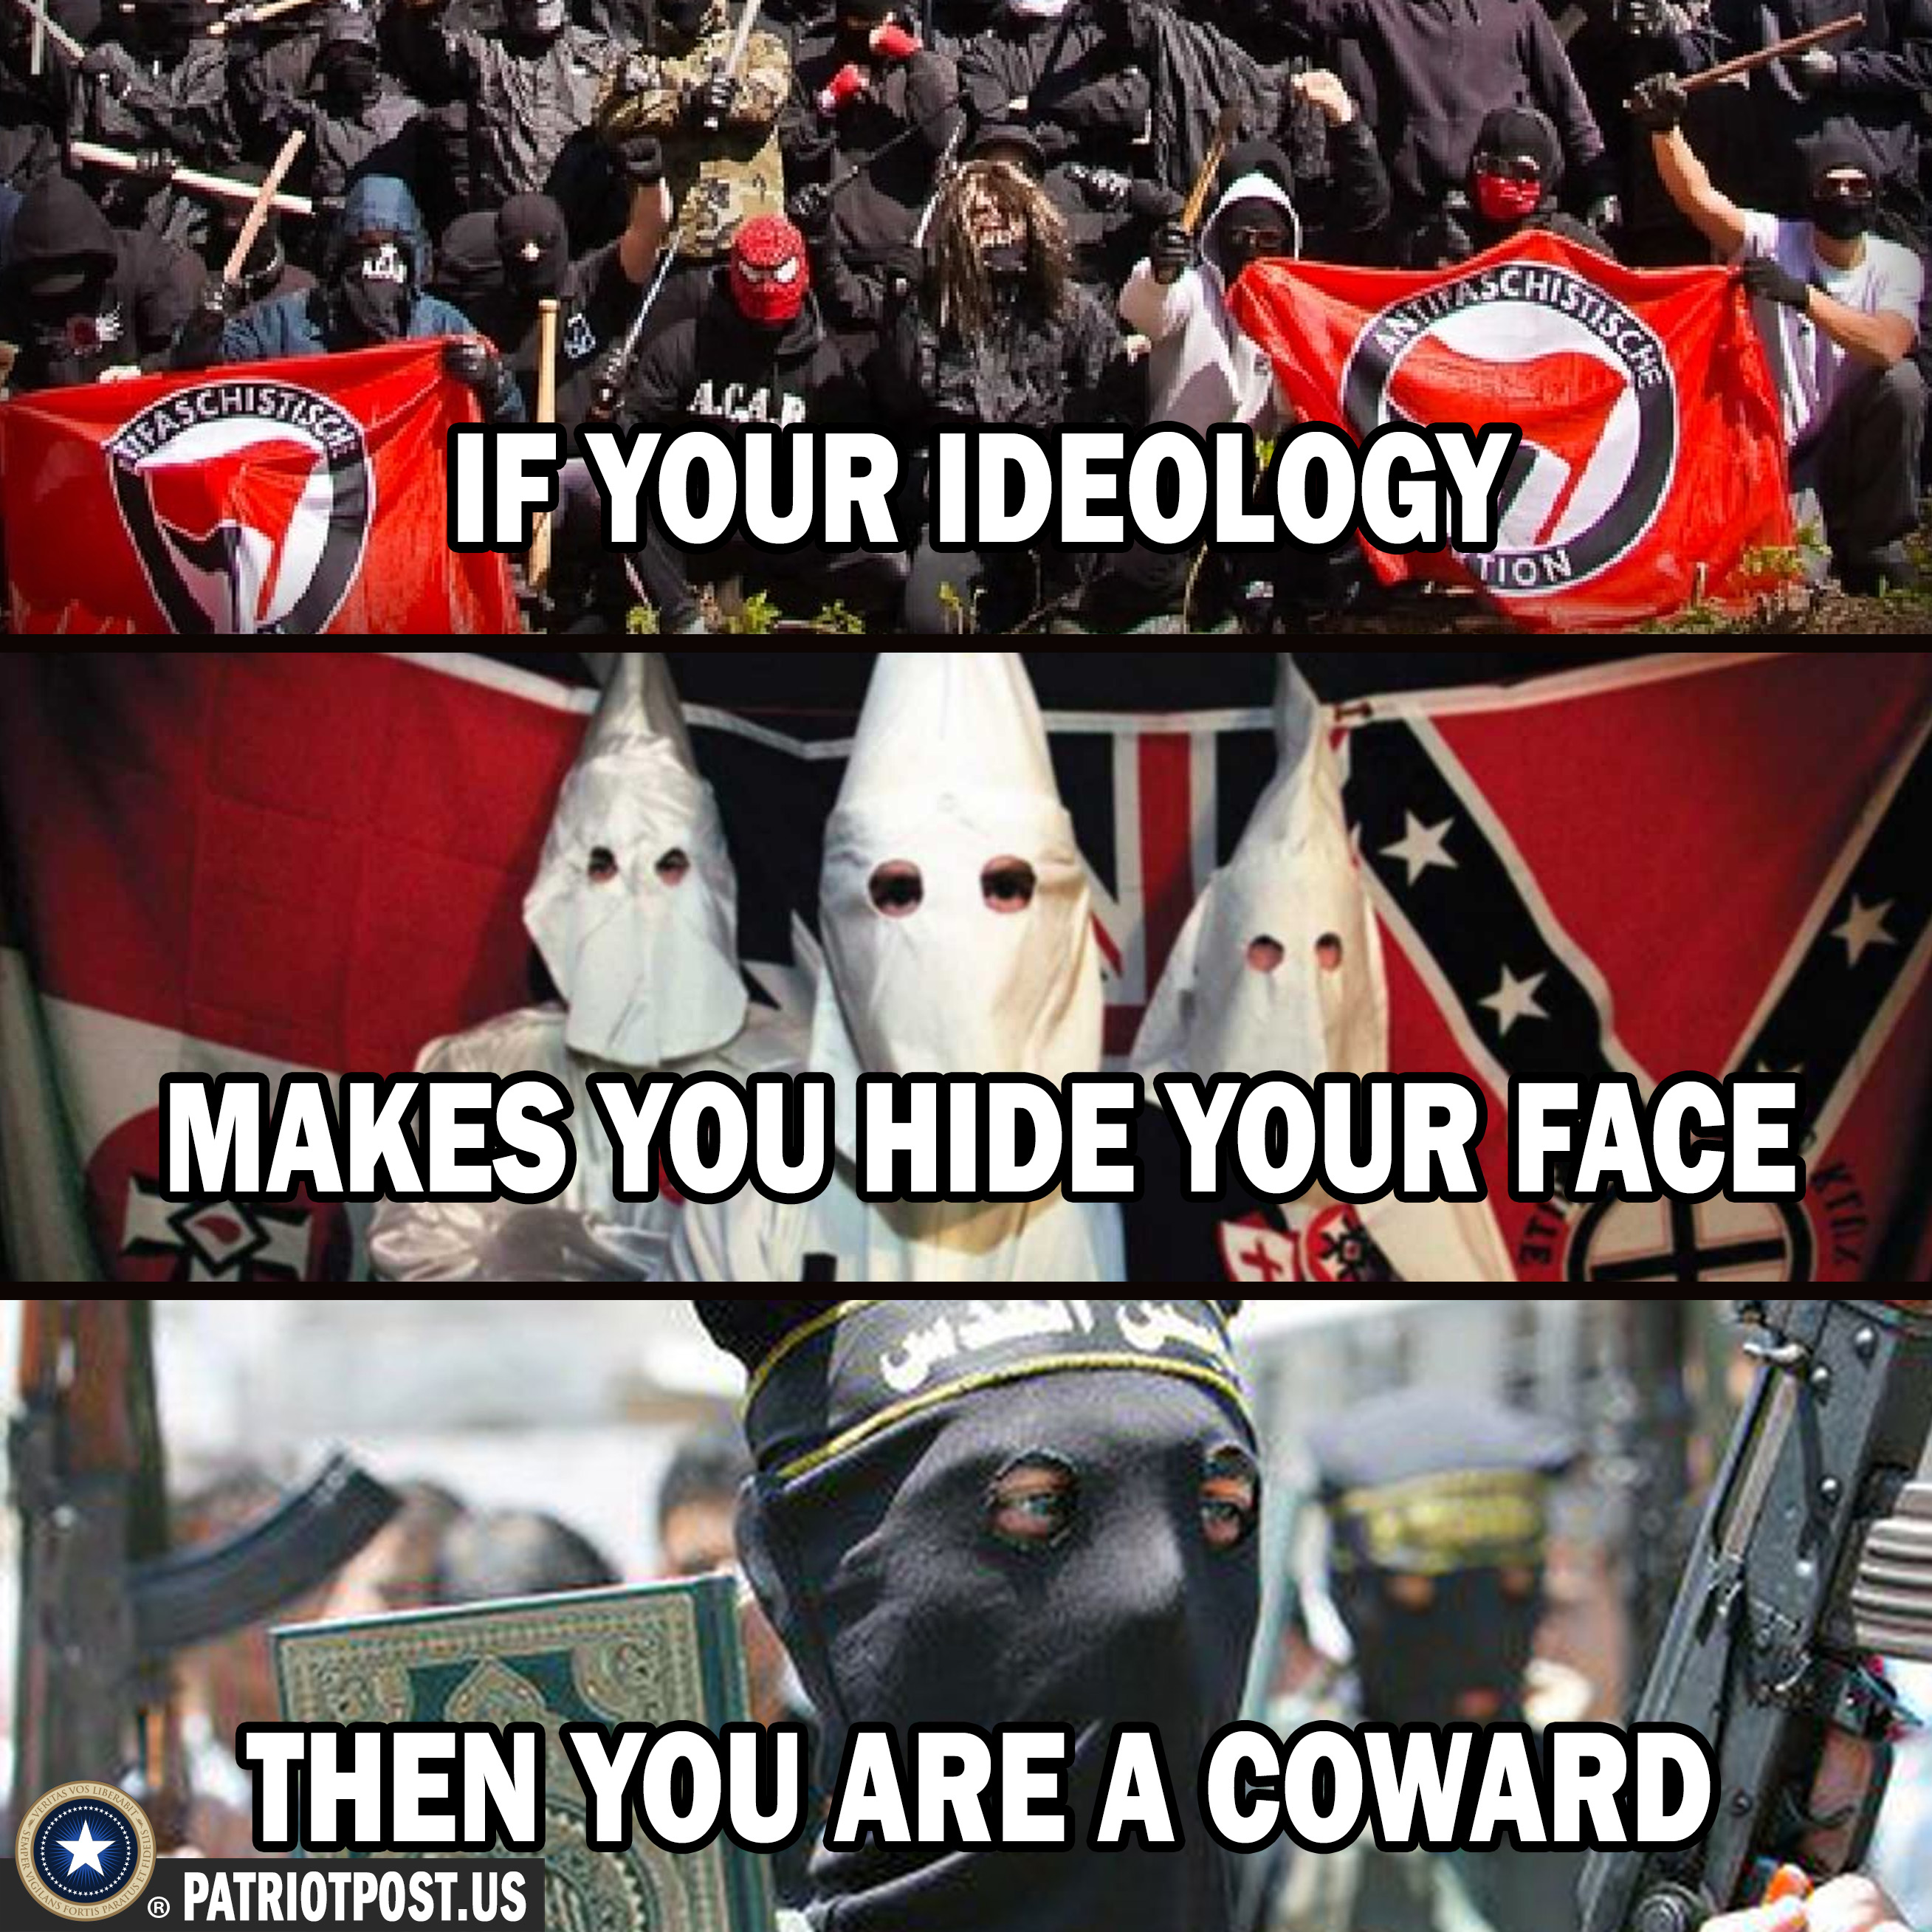 kkk and antifa - If Your Ideology. e Makes You Hide Your Face Then You Are A Coward Patriotpost.Us